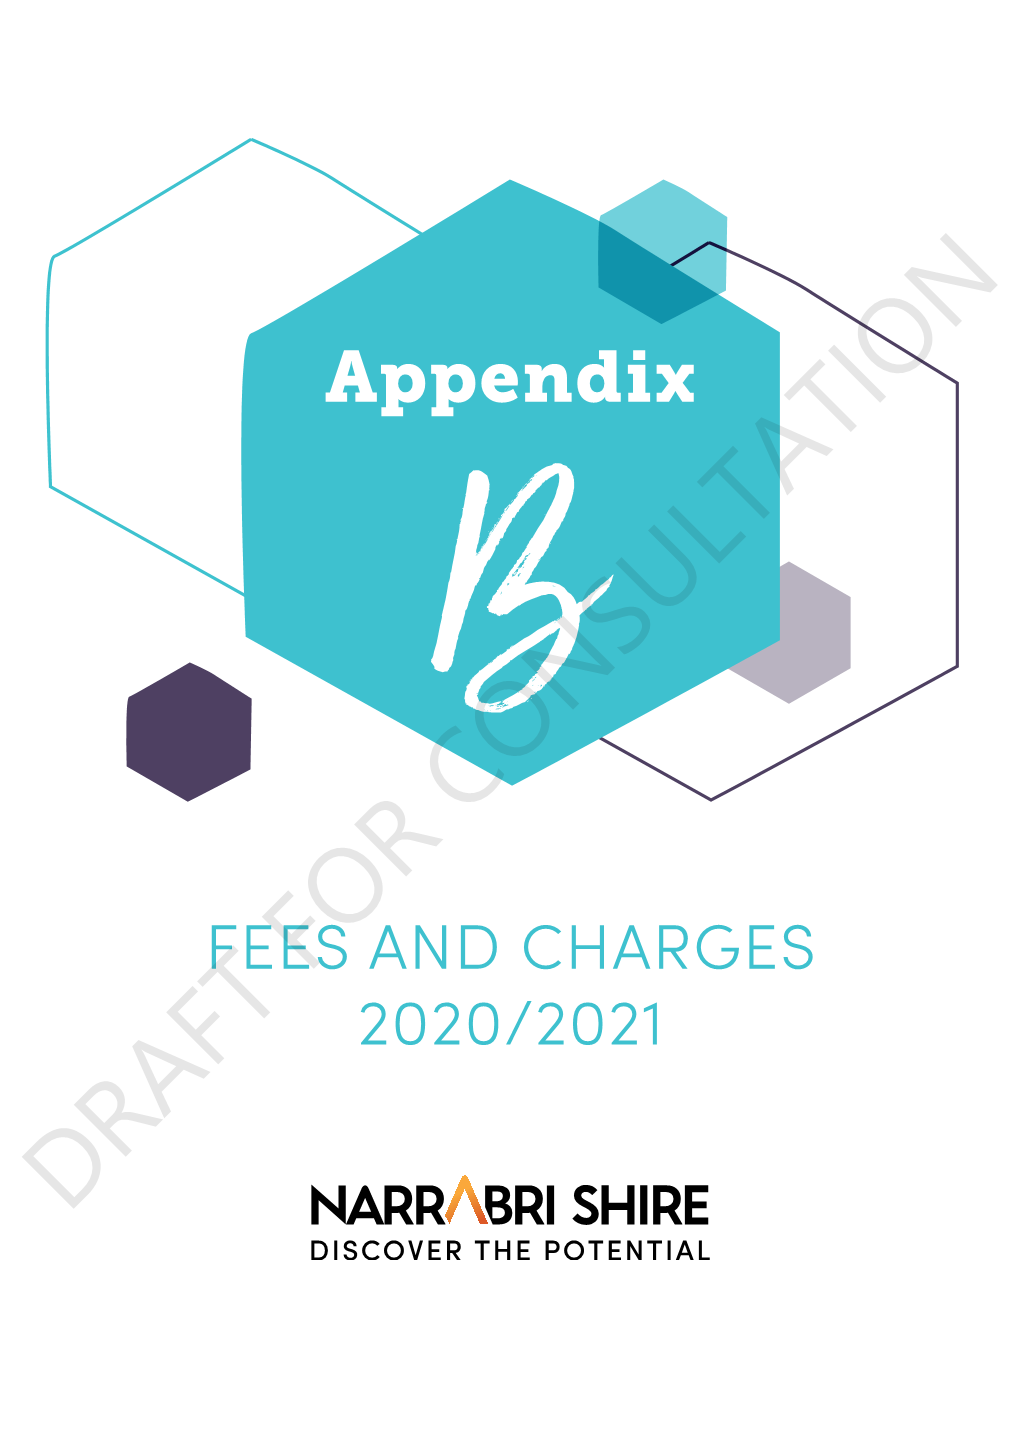 Attachment Draft 2020/2021 Fees and Charges